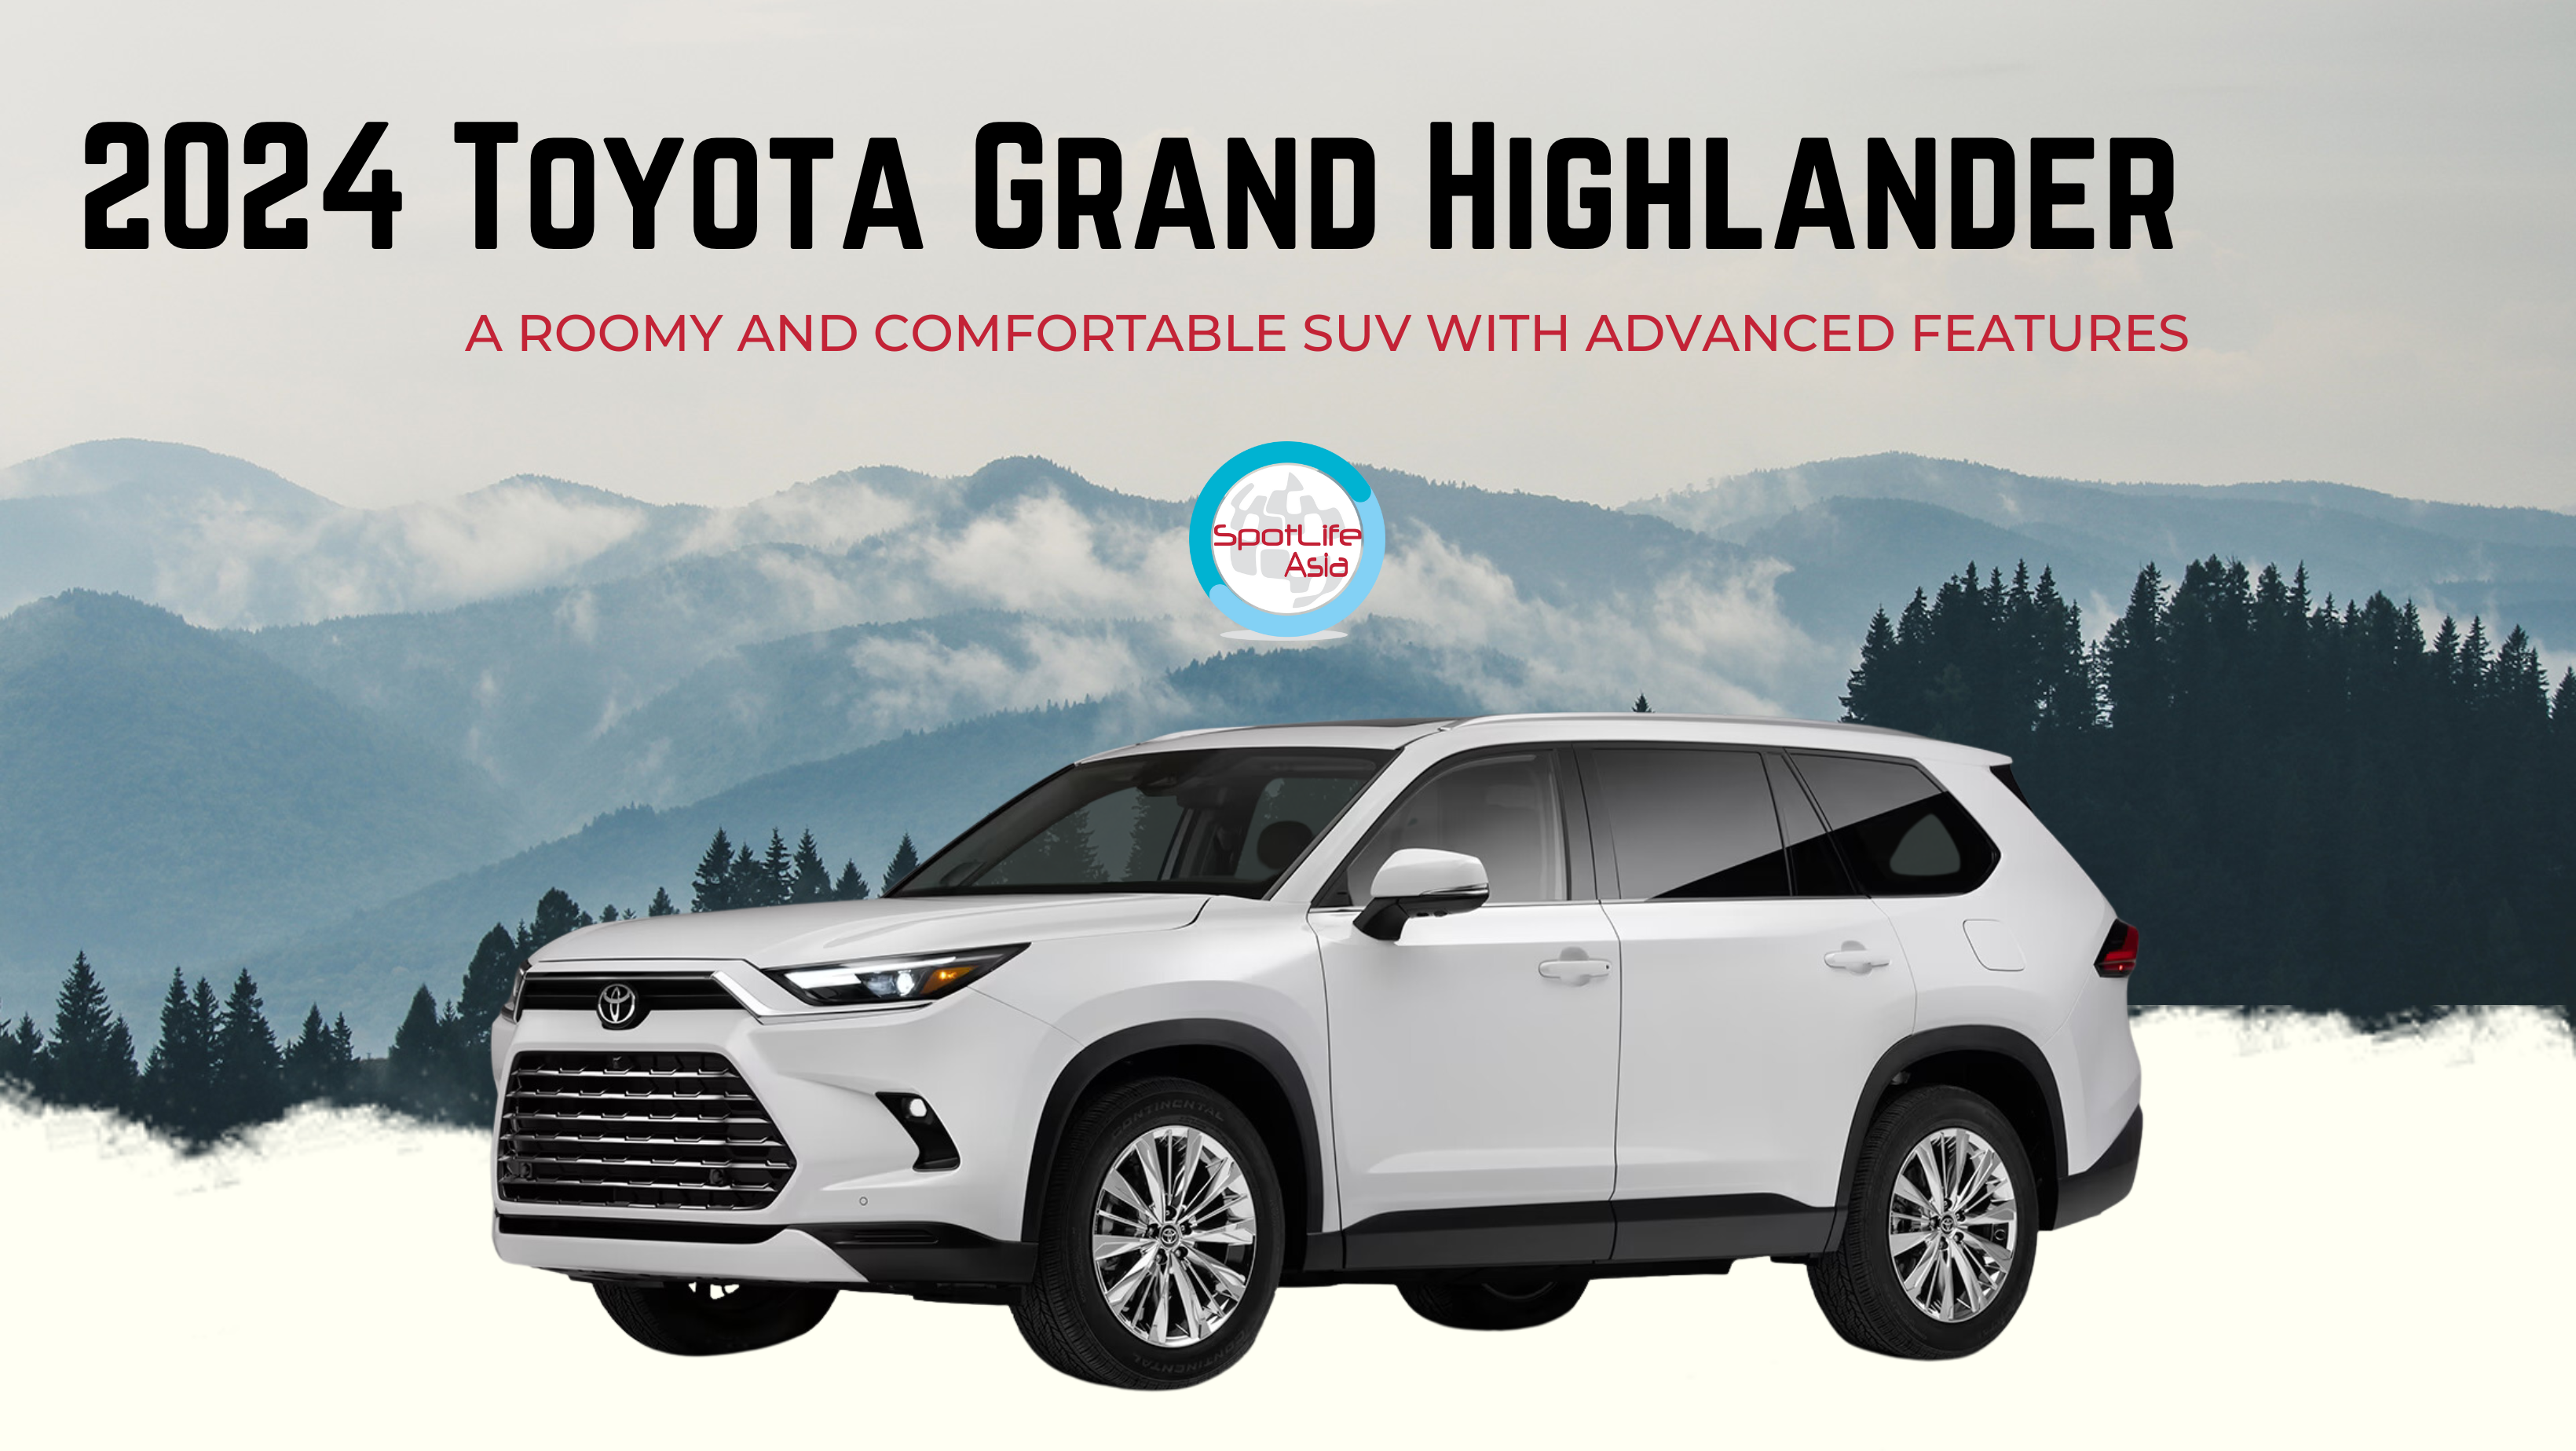 Top 20 Features Of The 2024 Toyota Grand Highlander